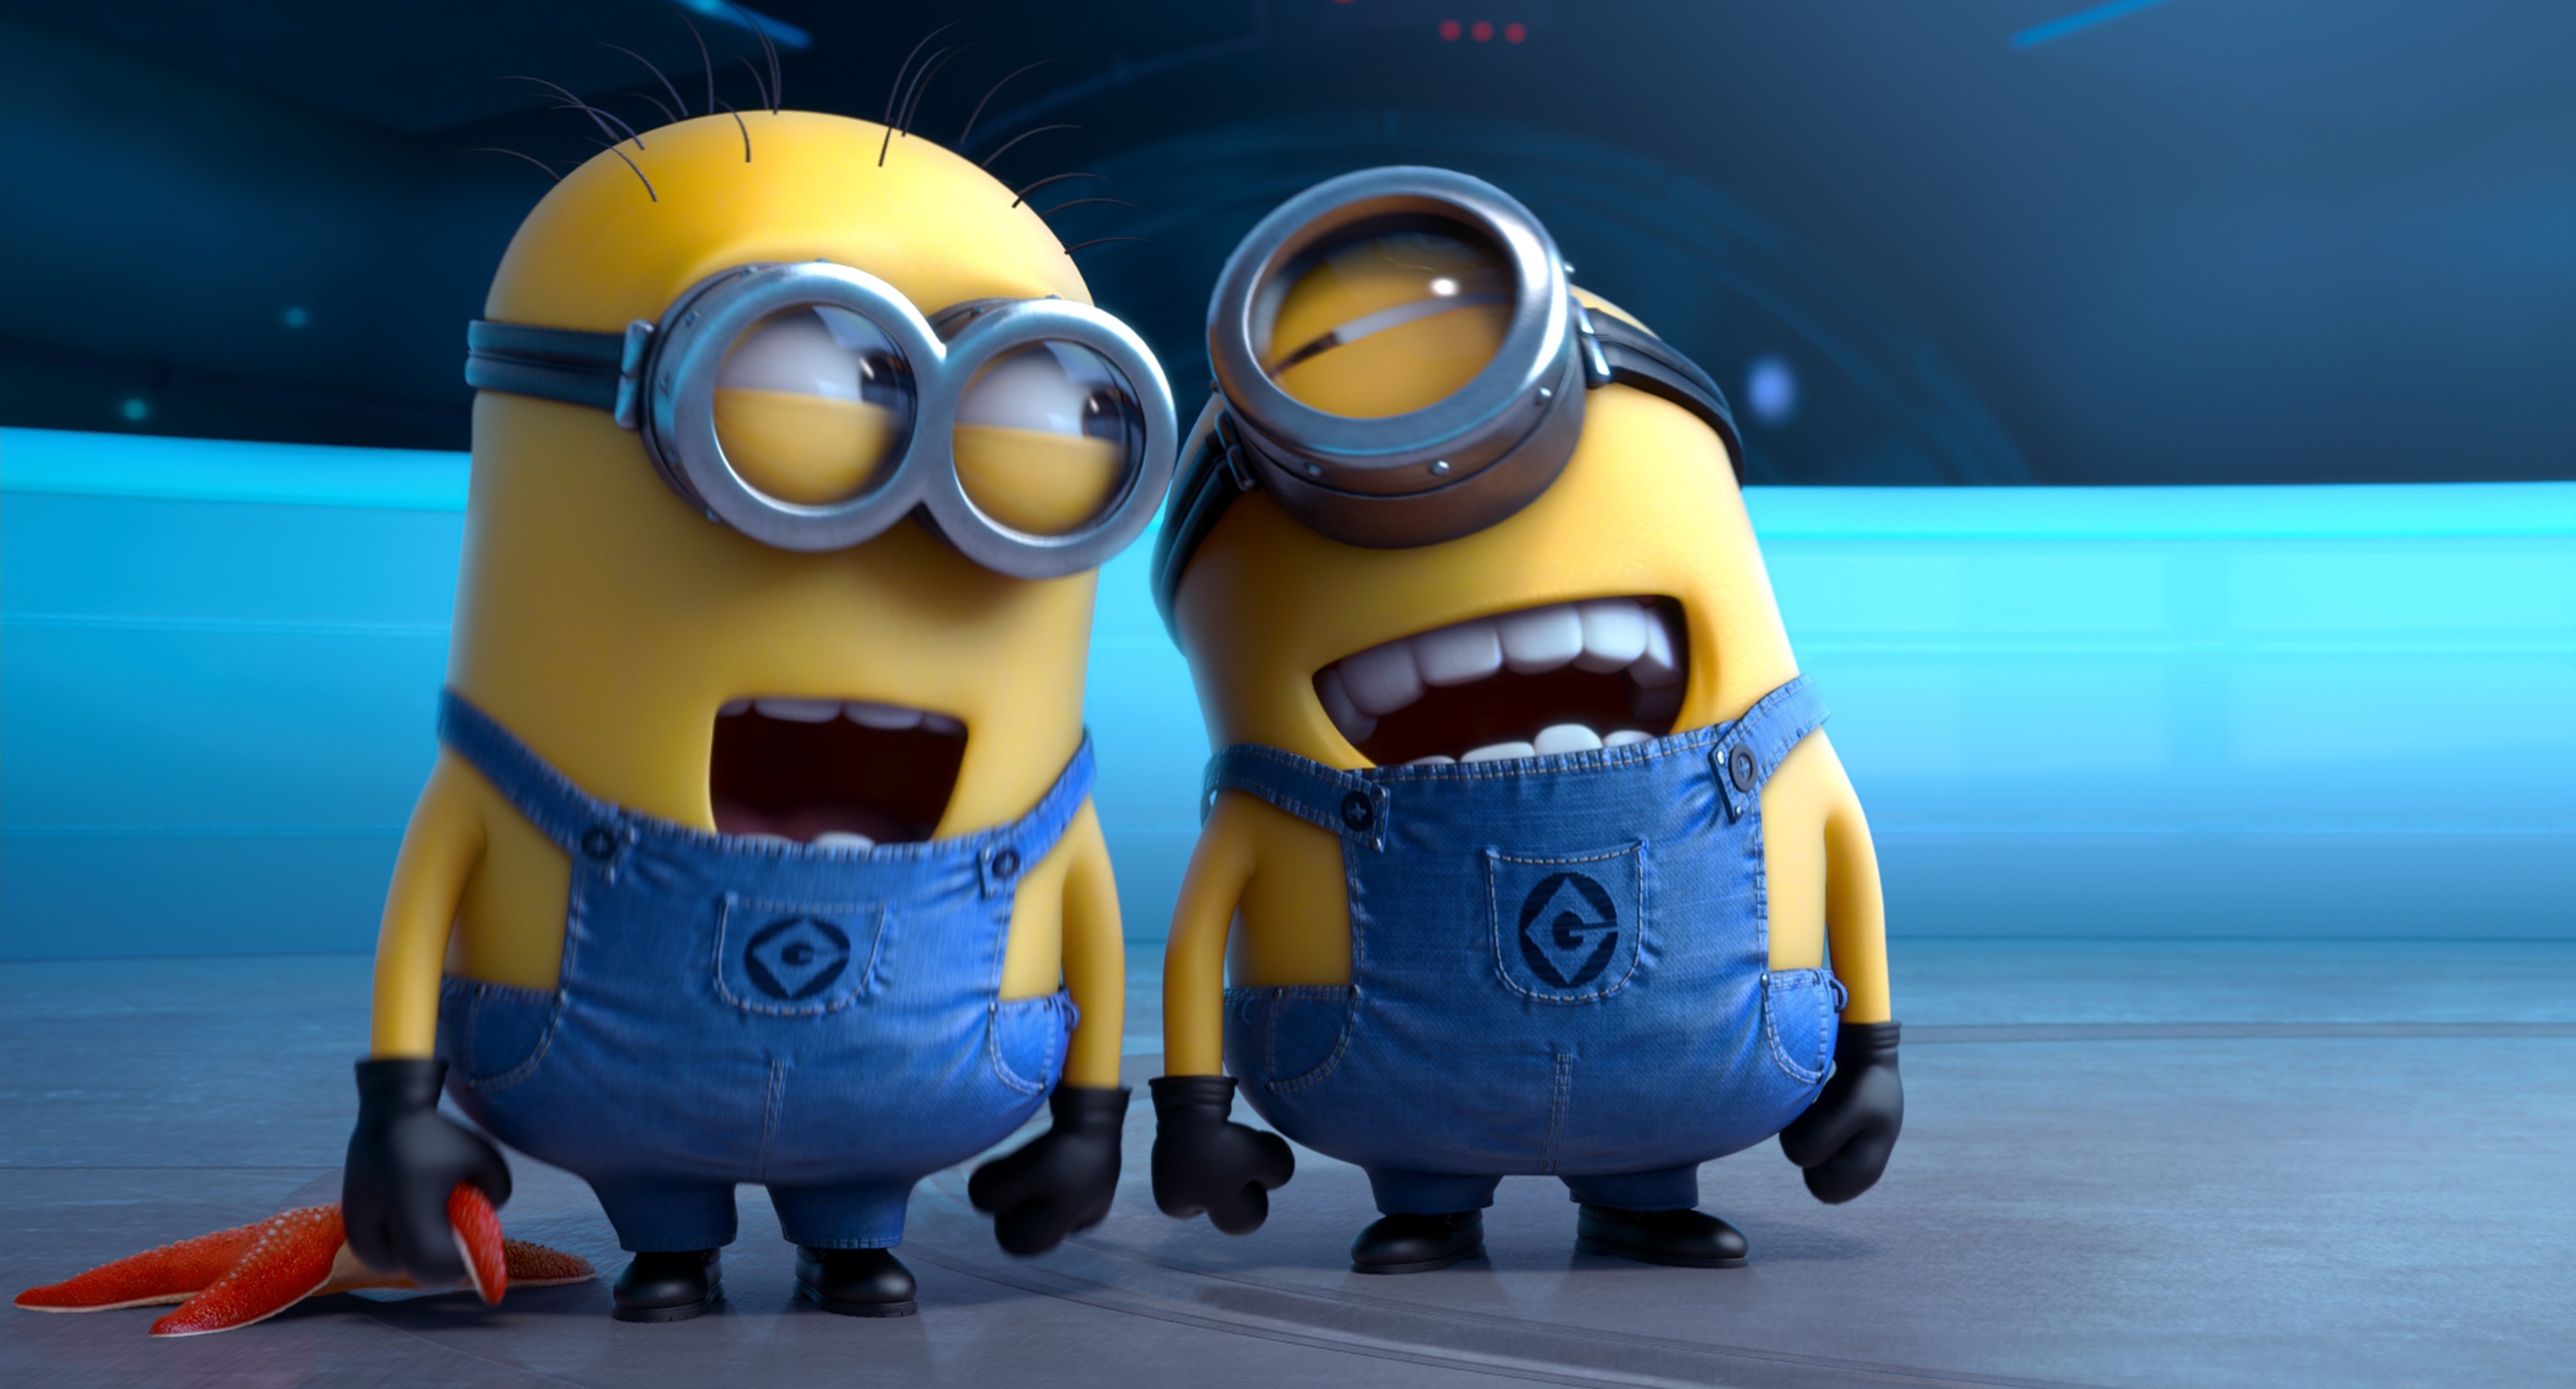 50 Minions HD Wallpapers and Backgrounds